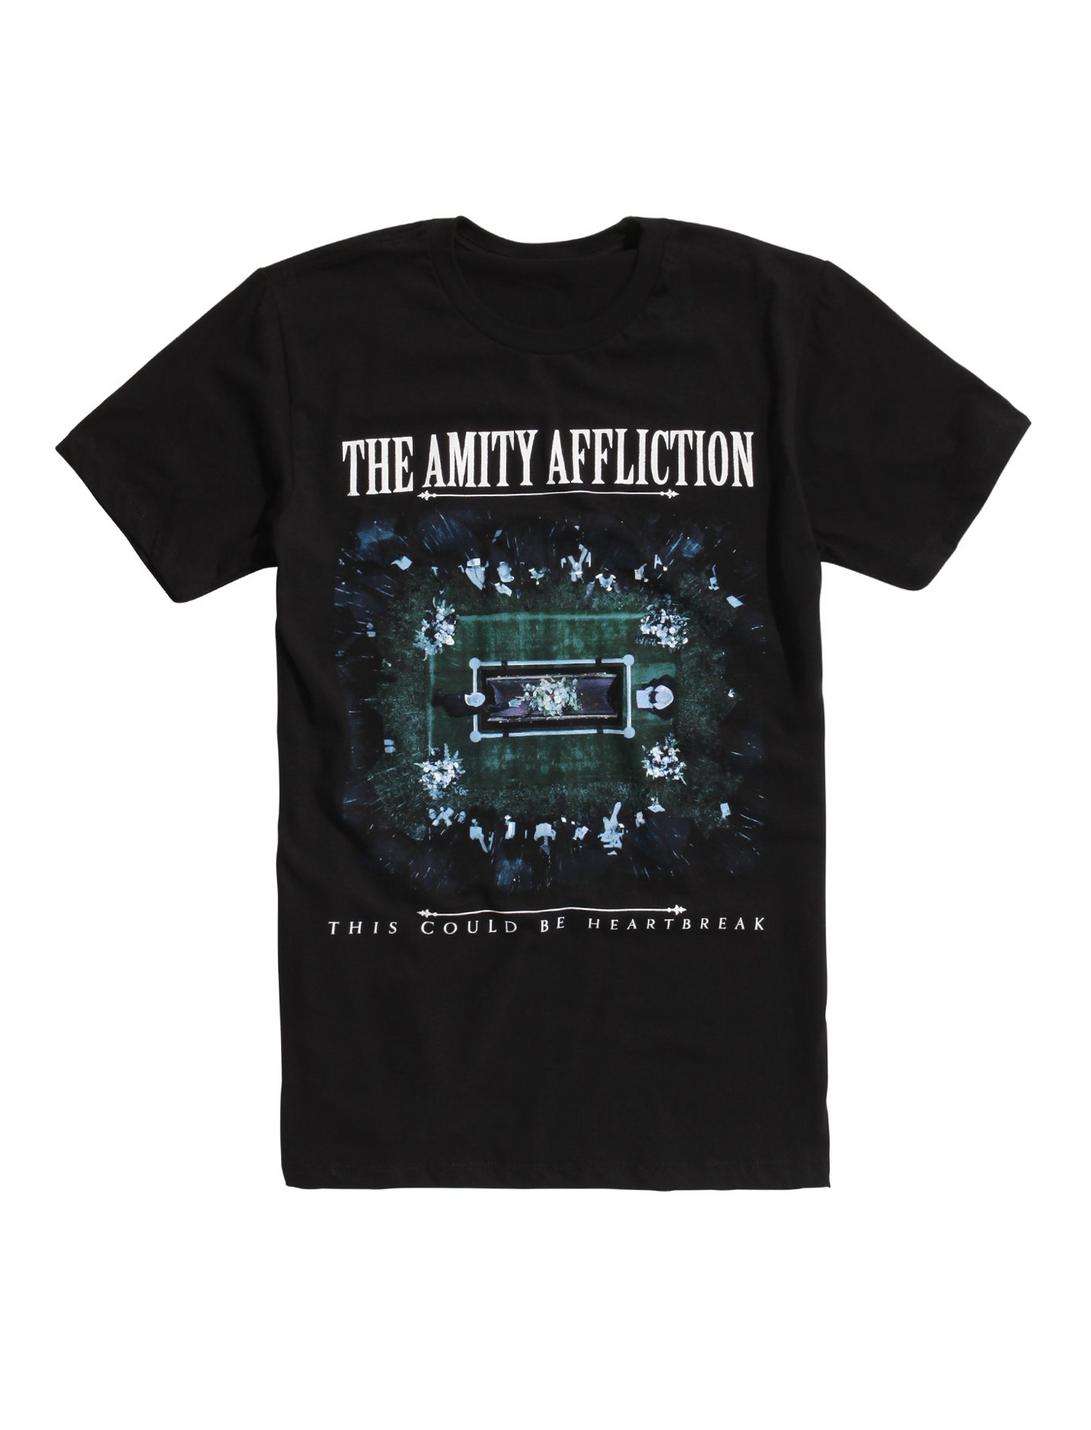 The Amity Affliction This Could Be Heartbreak T-Shirt, BLACK, hi-res